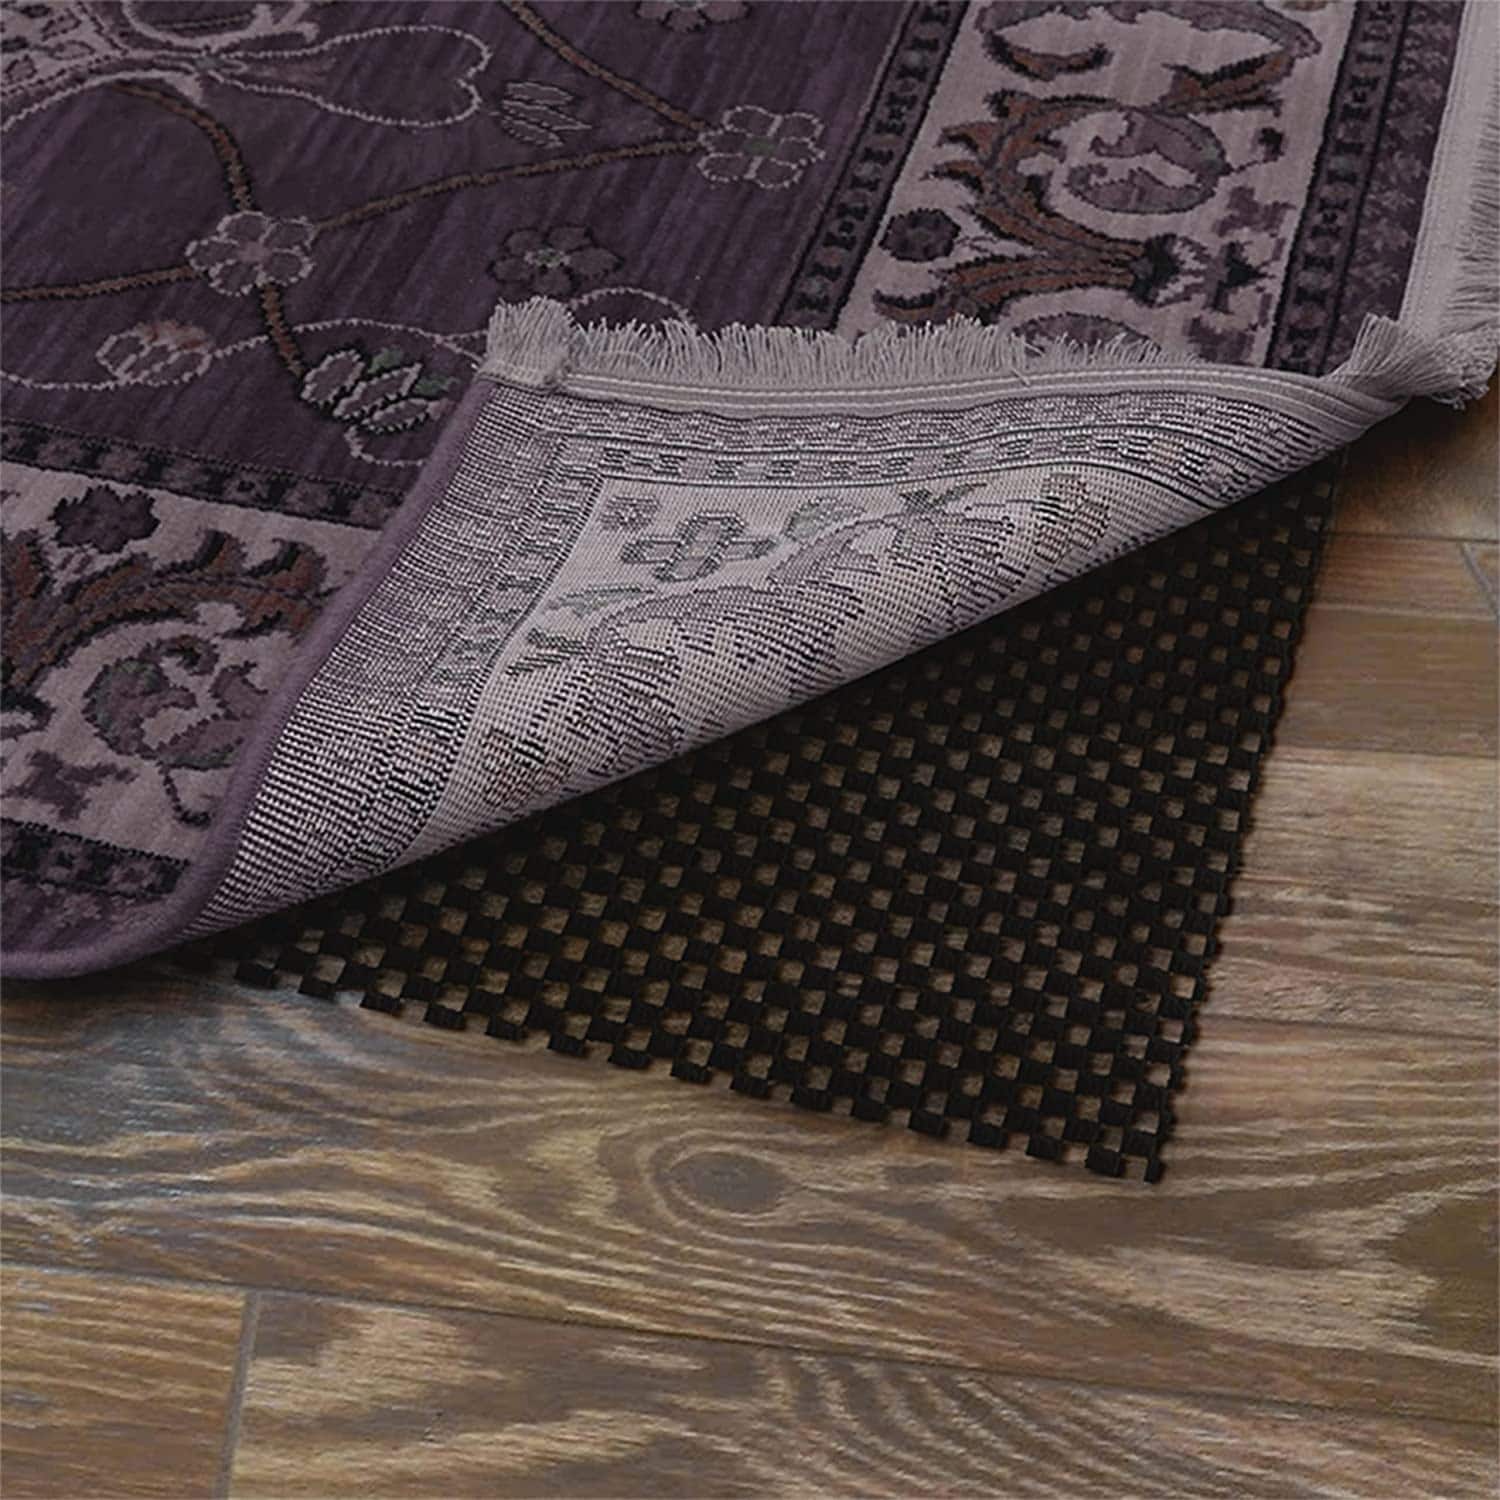 Pro Space Rug Pads - Bed Bath & Beyond